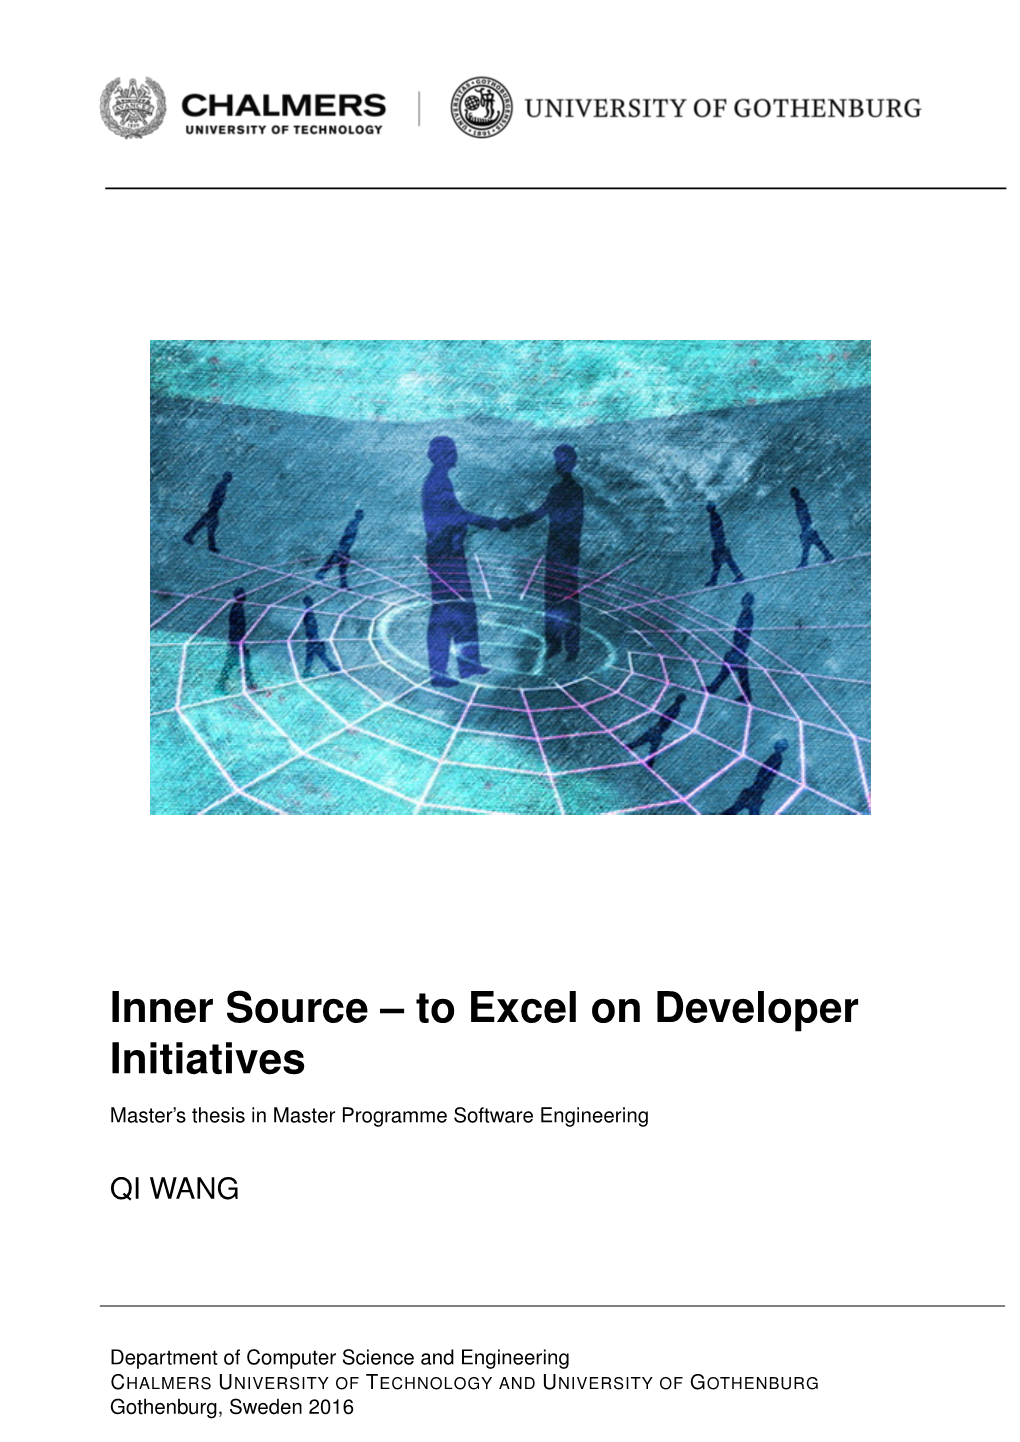 Inner Source – to Excel on Developer Initiatives